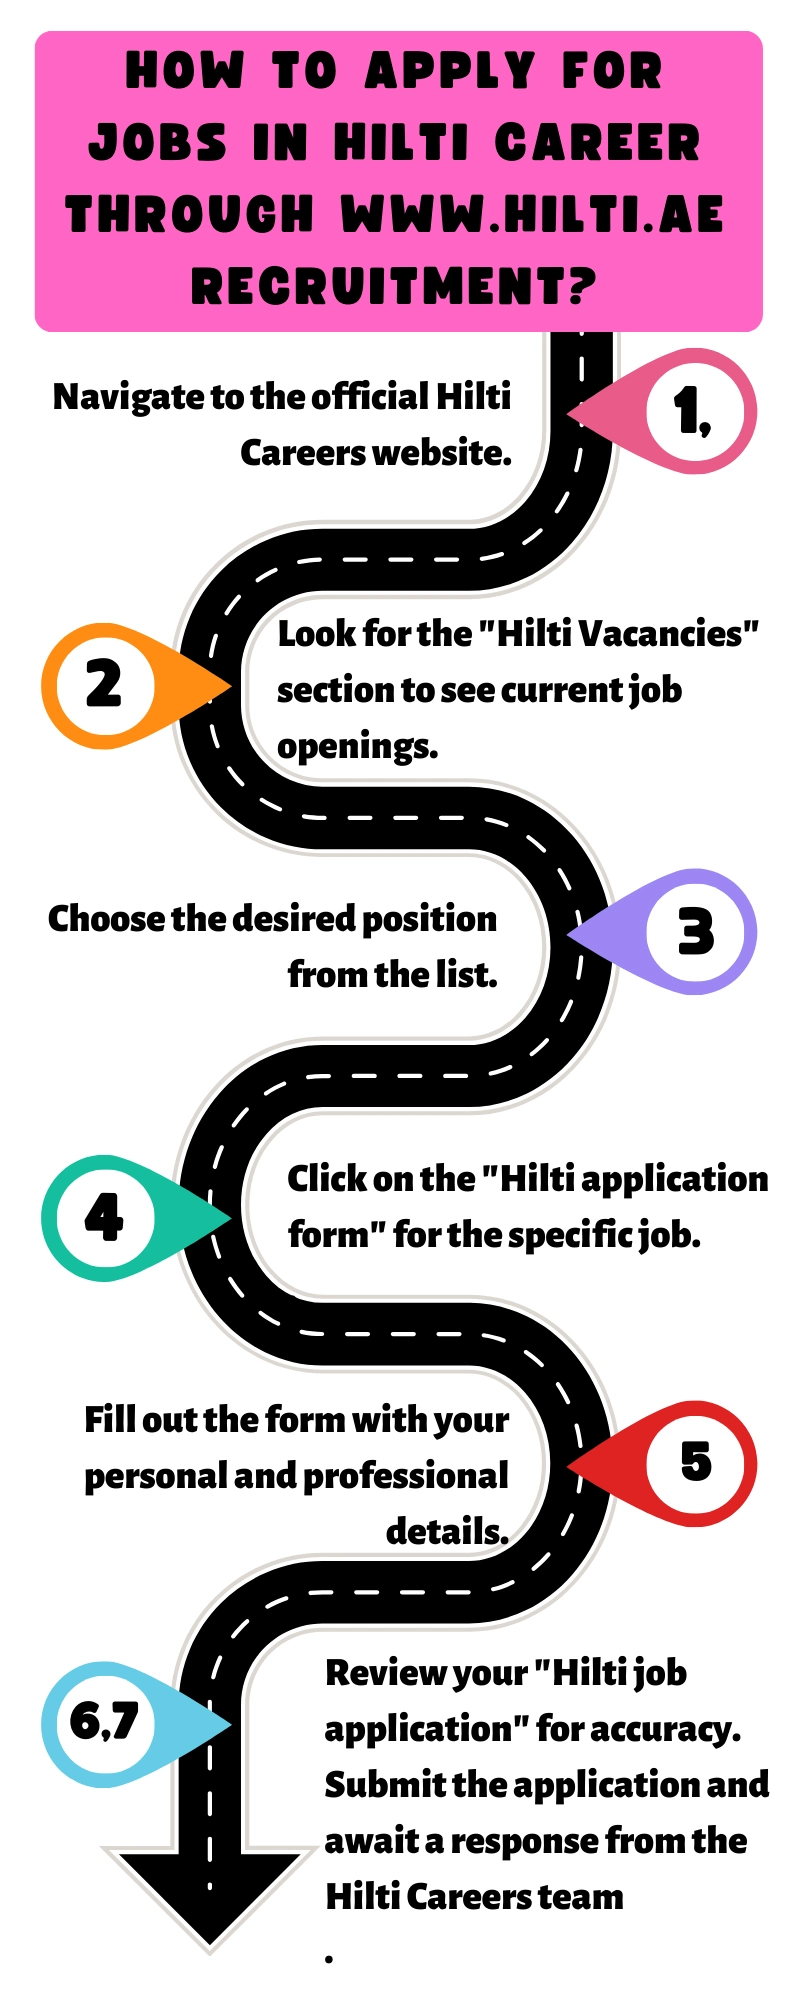 How to Apply for Jobs in Hilti Career through www.hilti.ae recruitment?